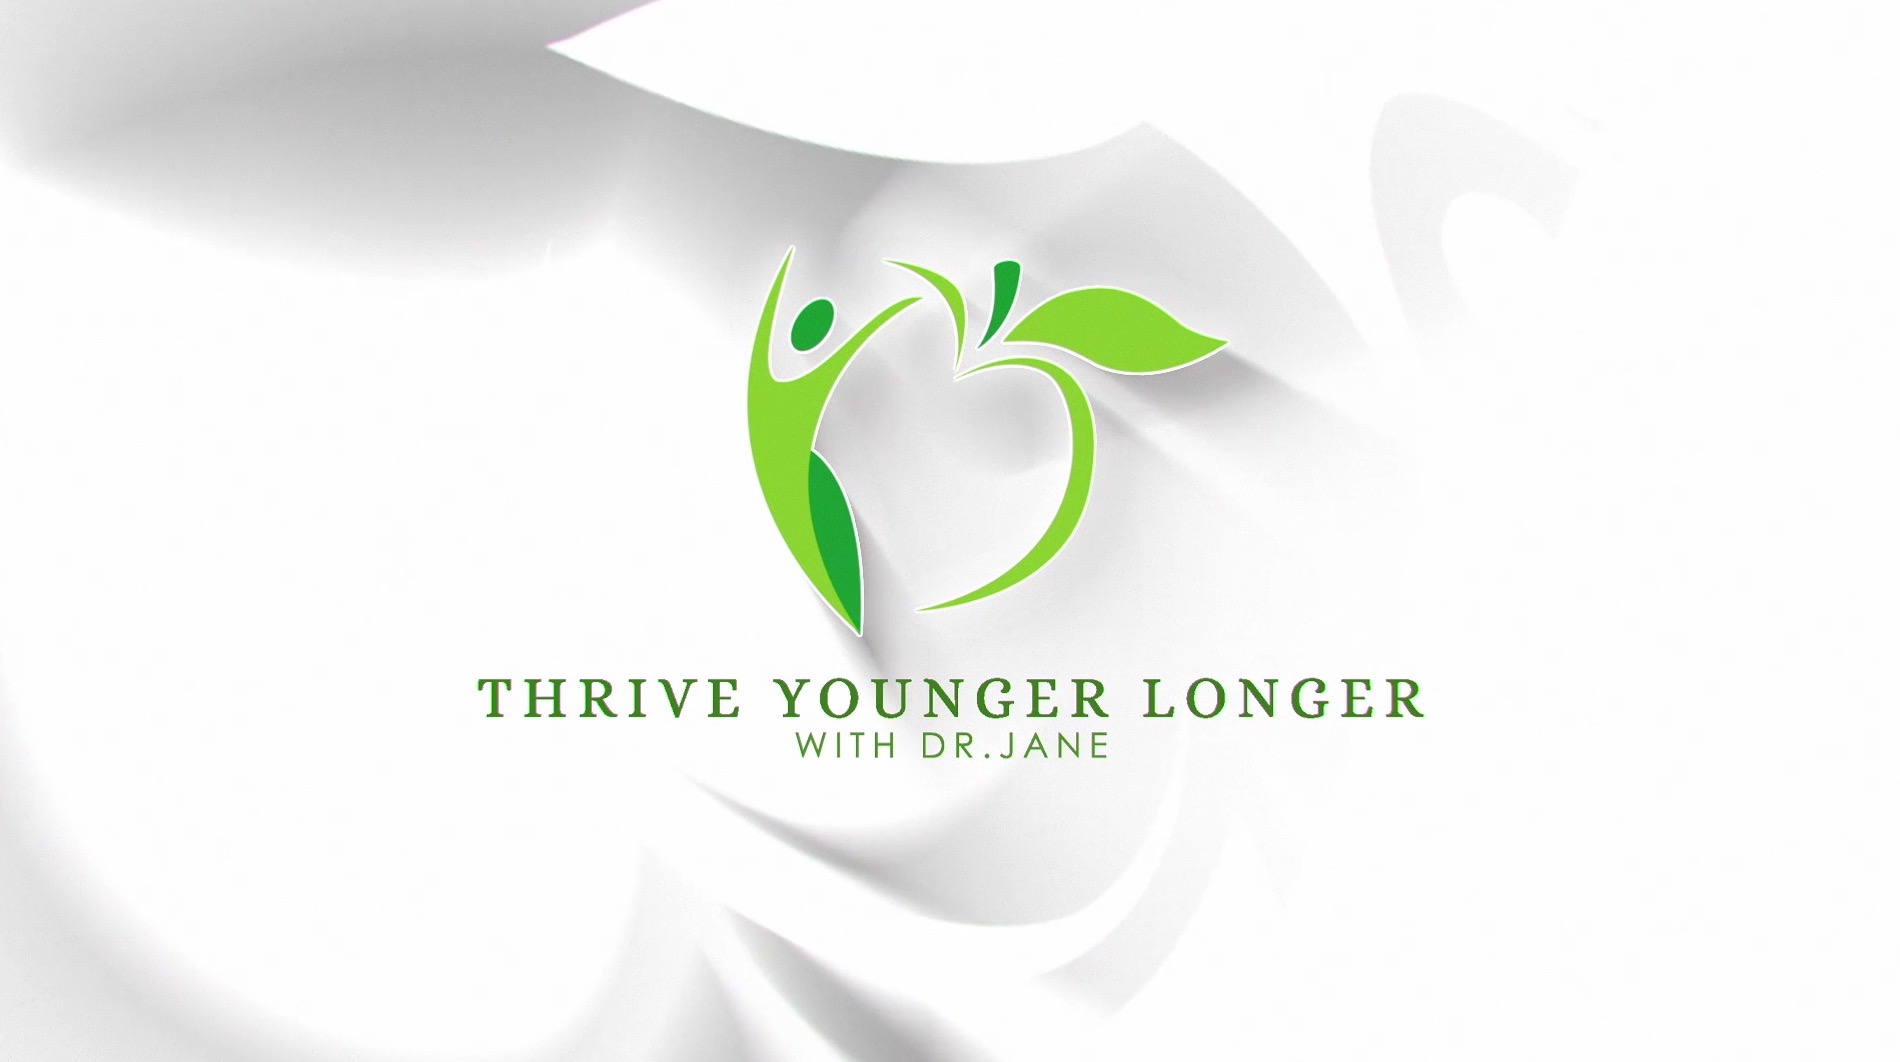 Thrive Younger Longer with Dr. Jane